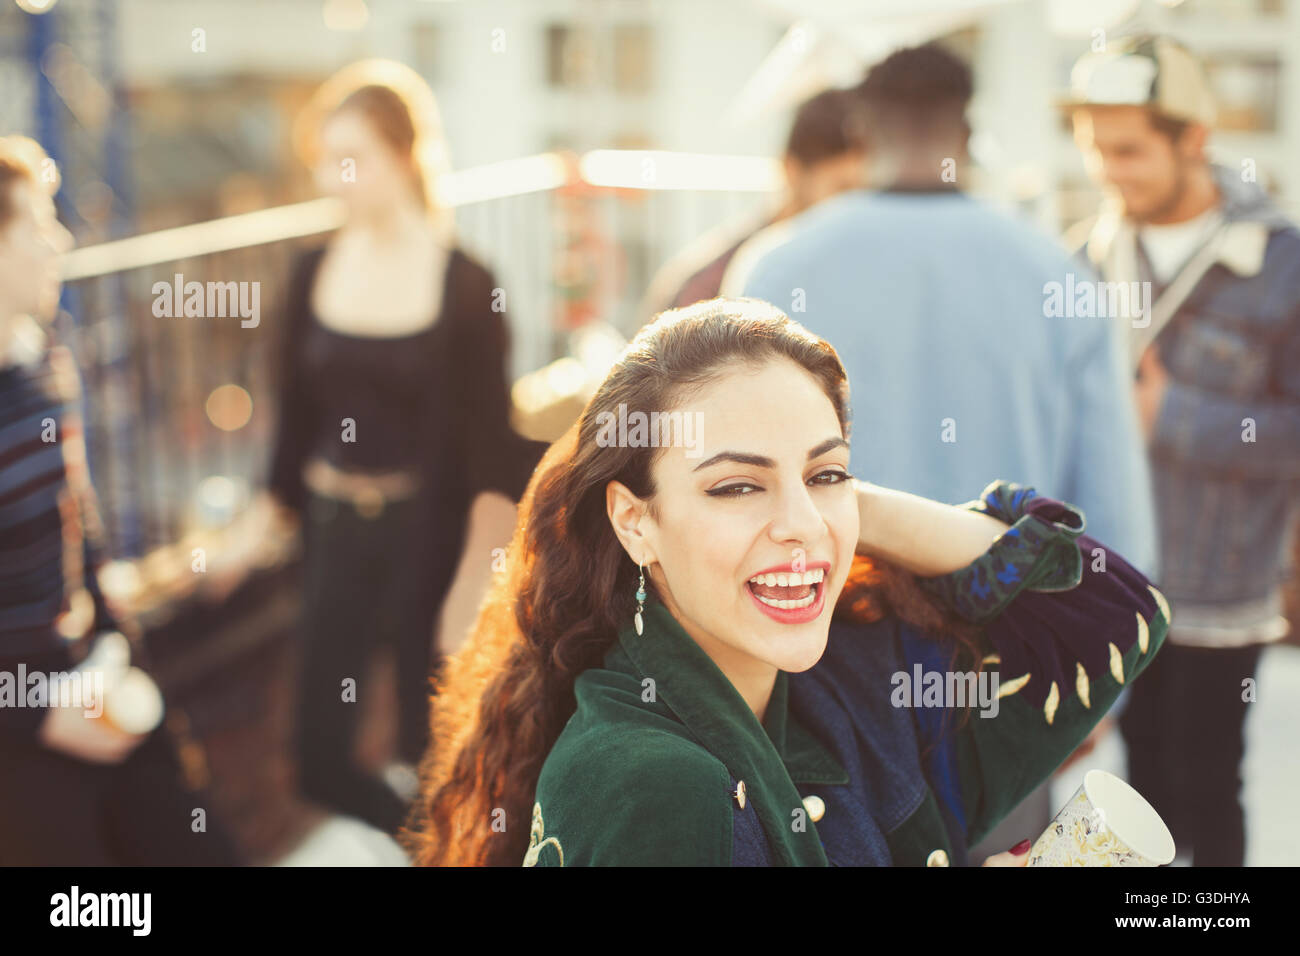 Portrait enthusiastic young woman enjoying rooftop party Stock Photo